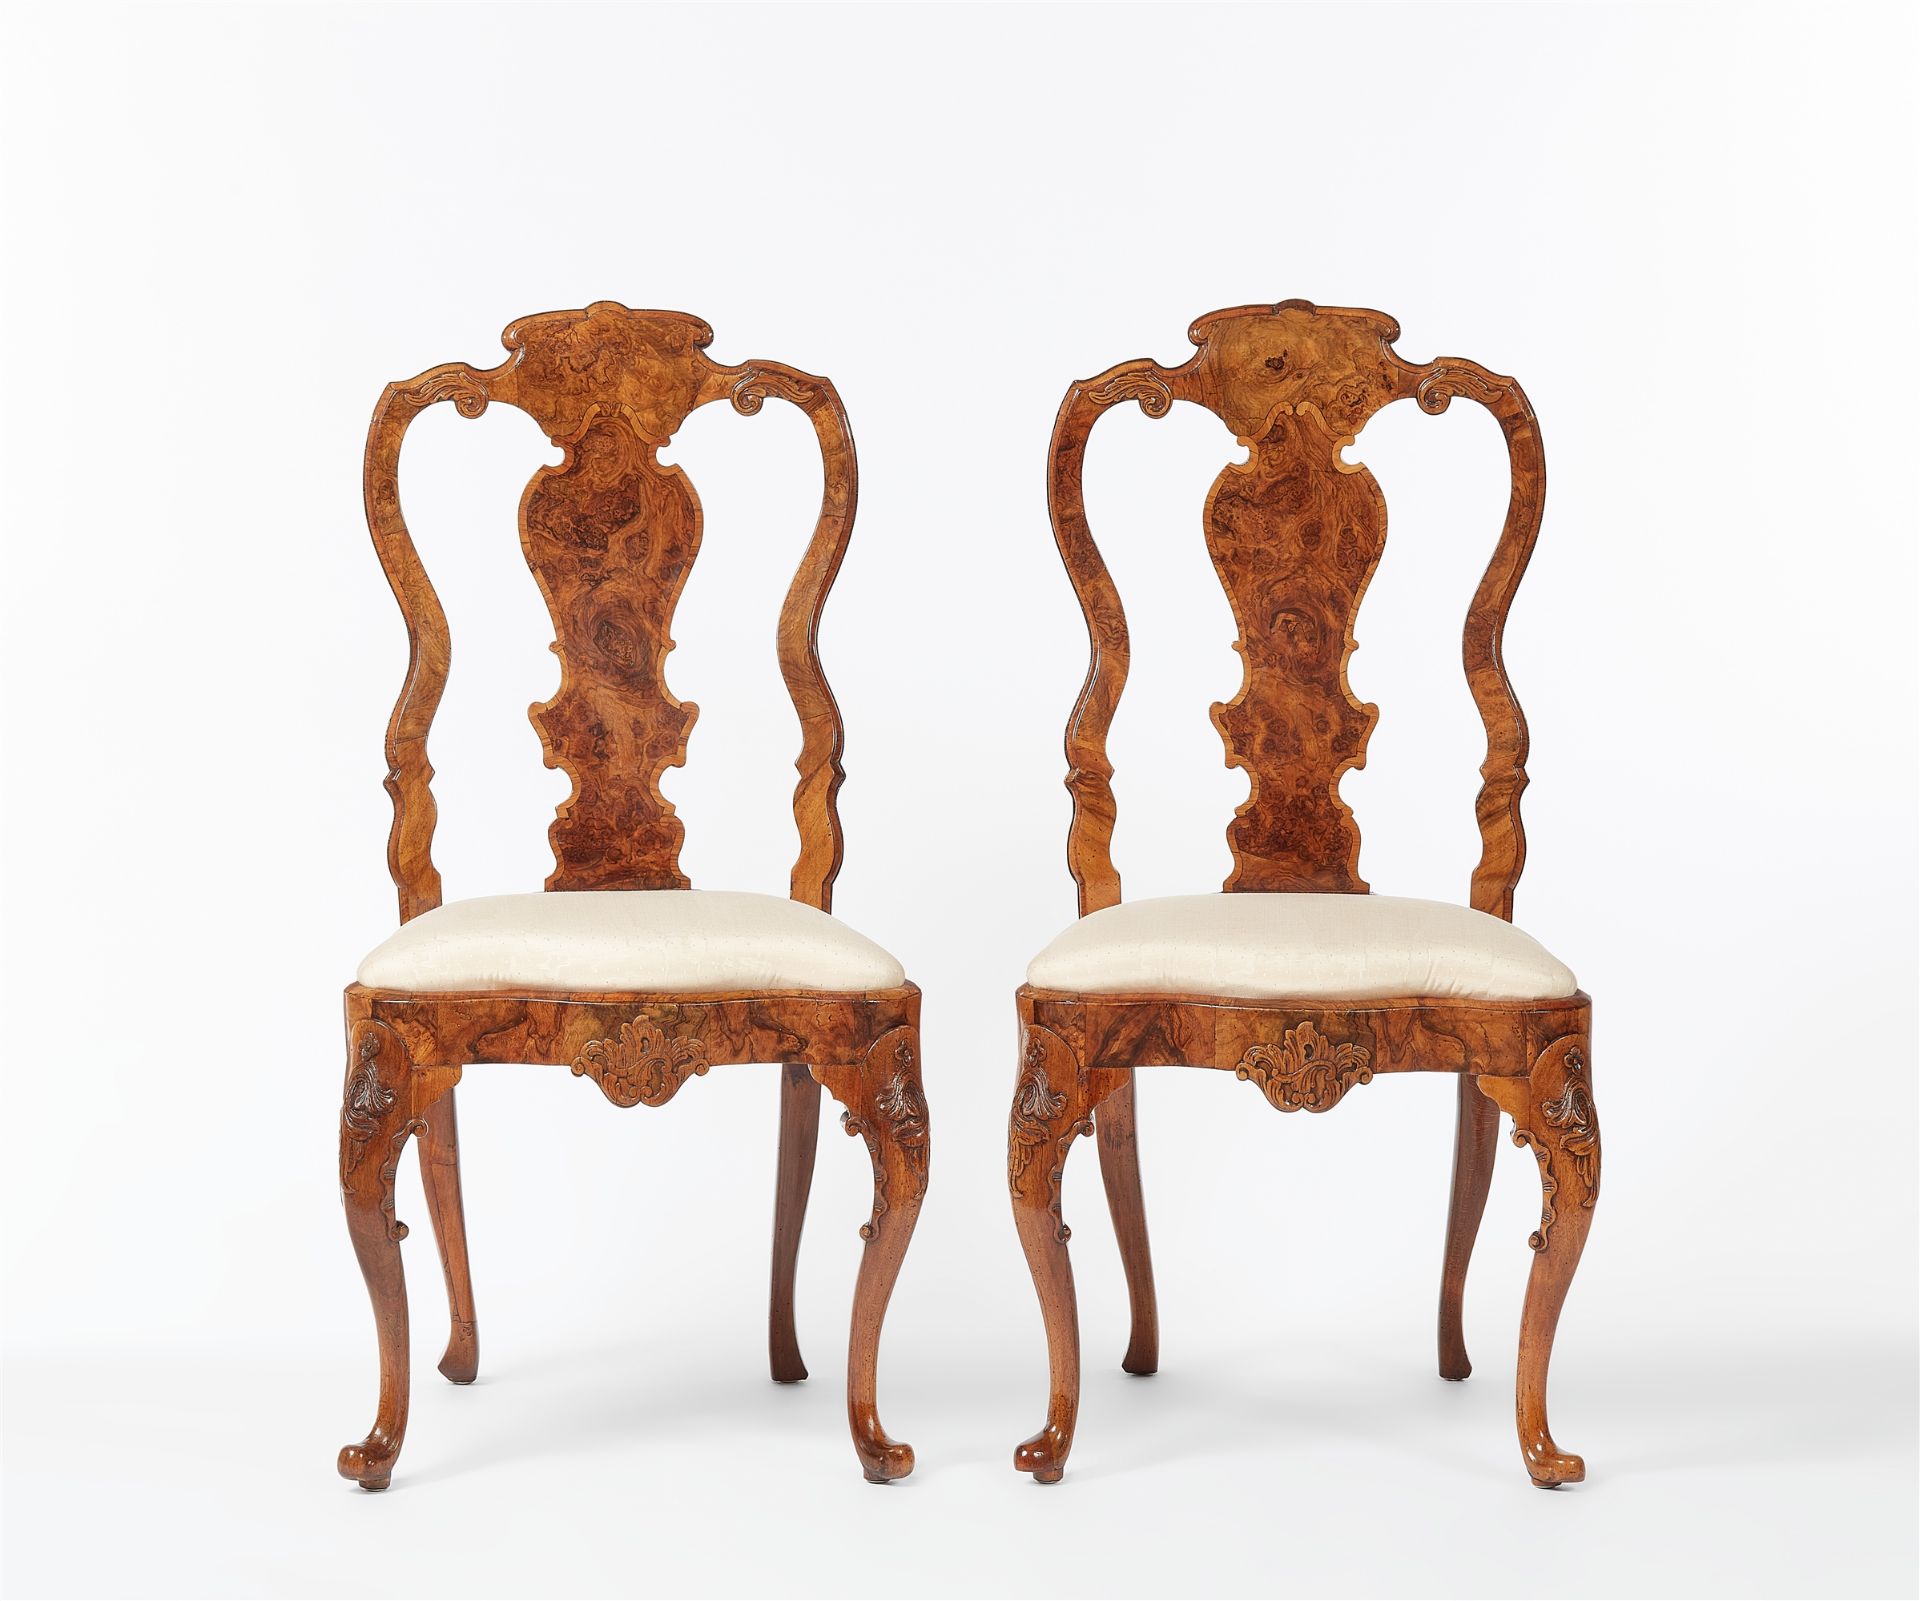 Four chairs by Abraham Roentgen - Image 2 of 6